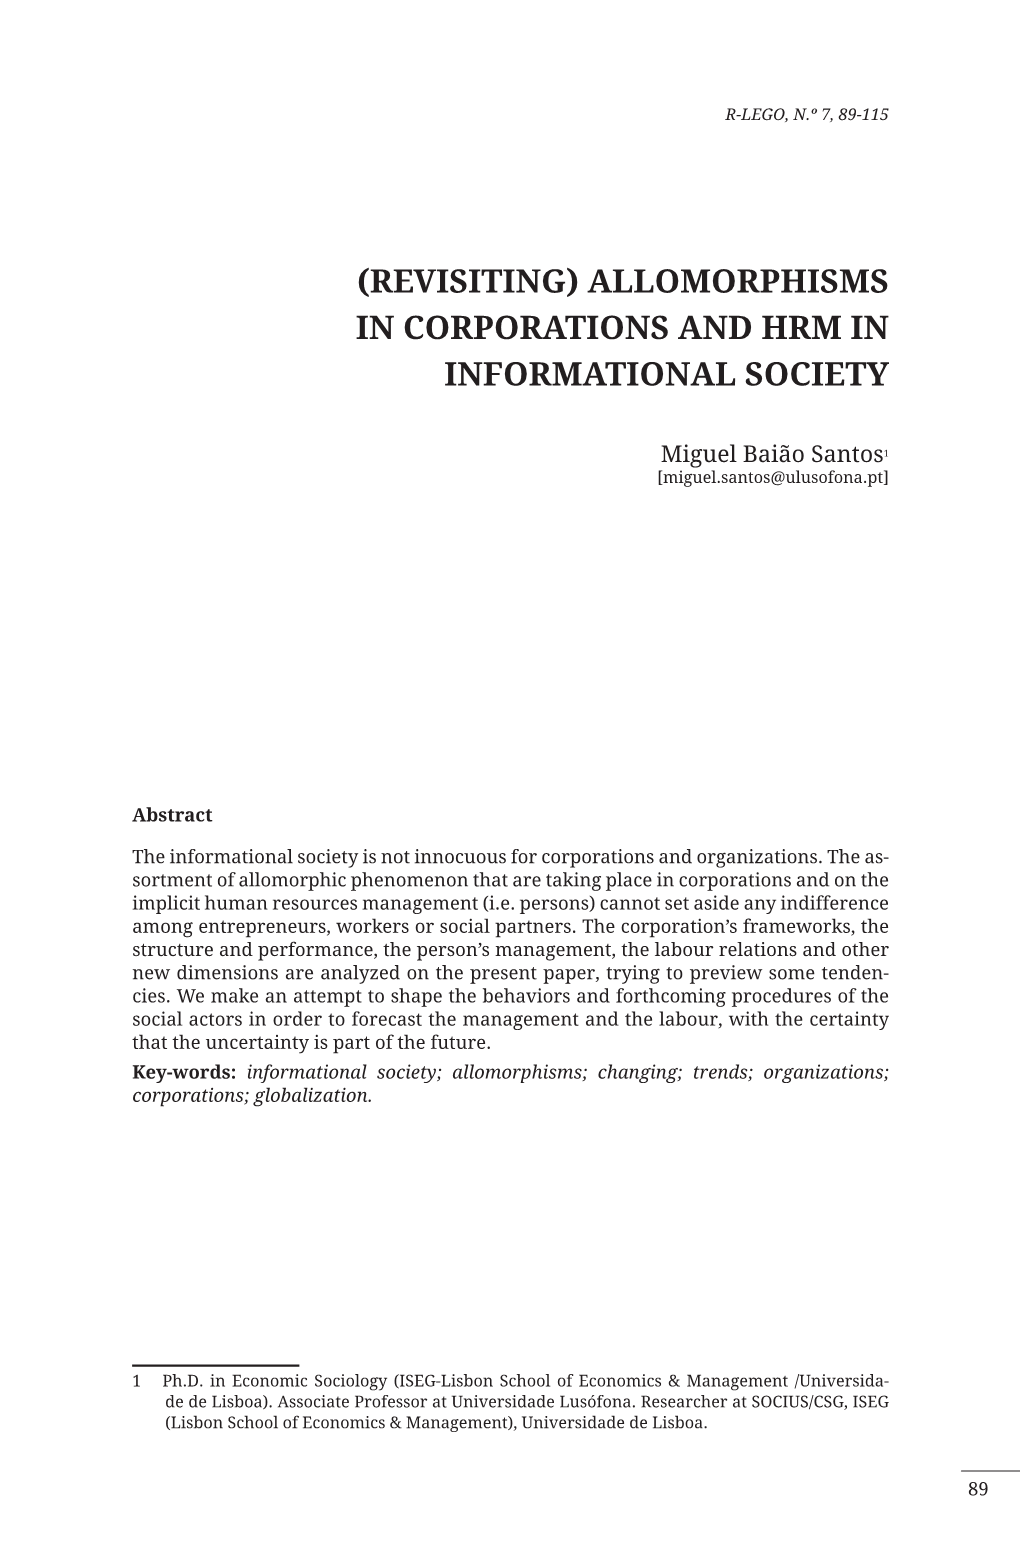 (Revisiting) Allomorphisms in Corporations and Hrm in Informational Society